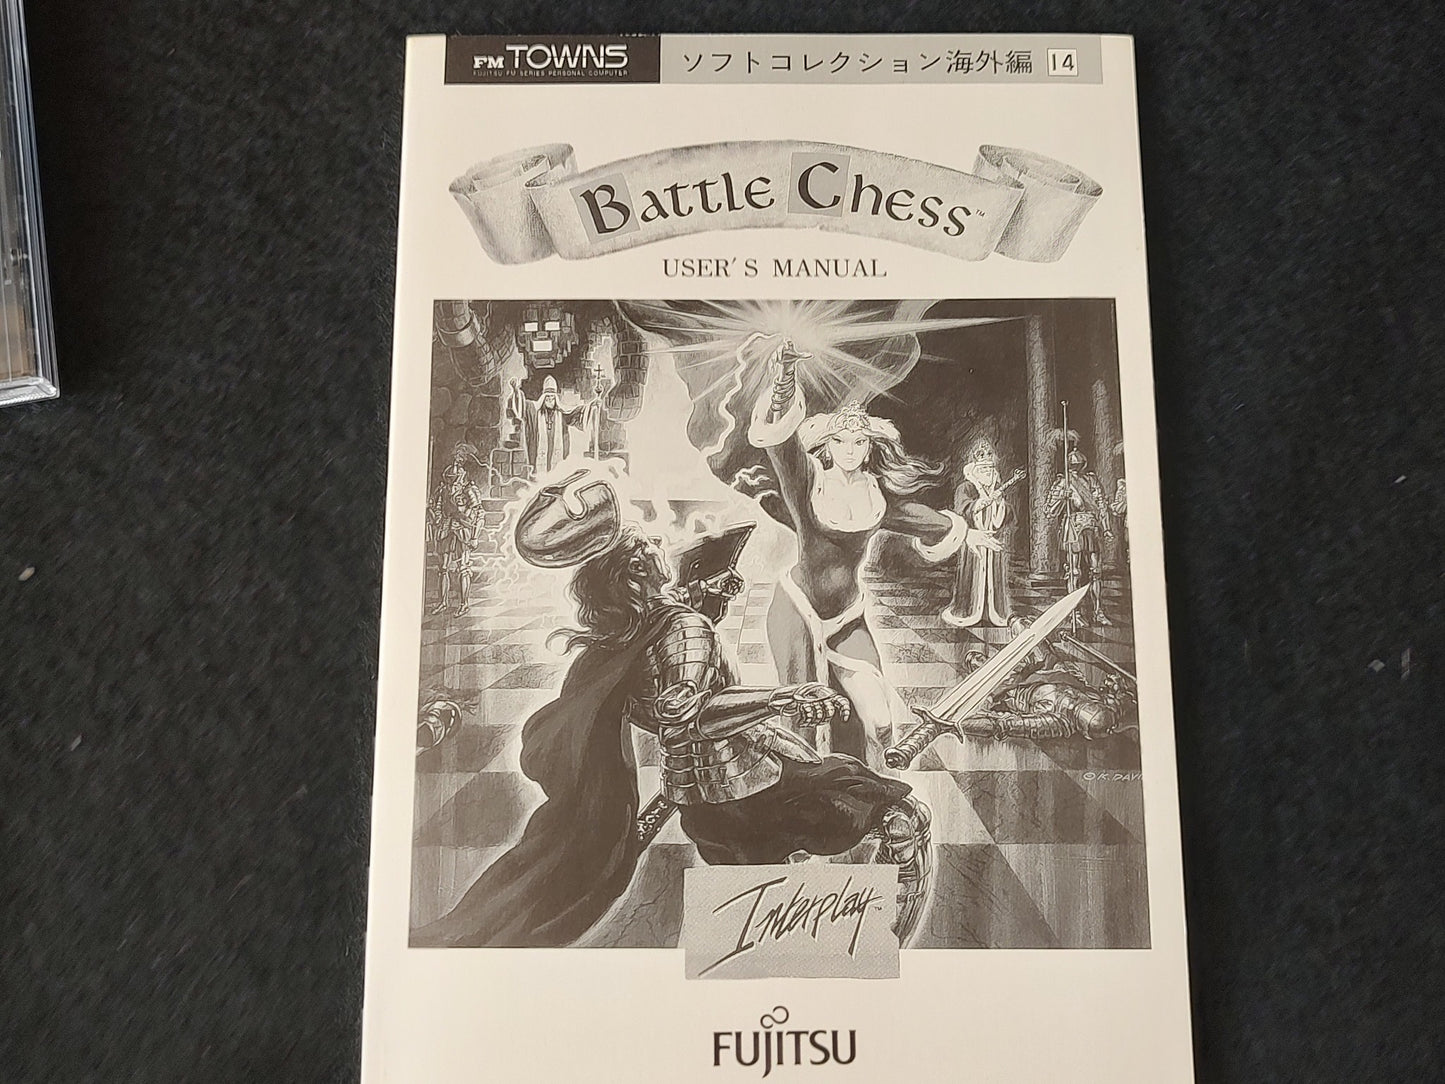 Battle Chess FM TOWNS Marty Game w/Manual, Box set, Working-f1026-